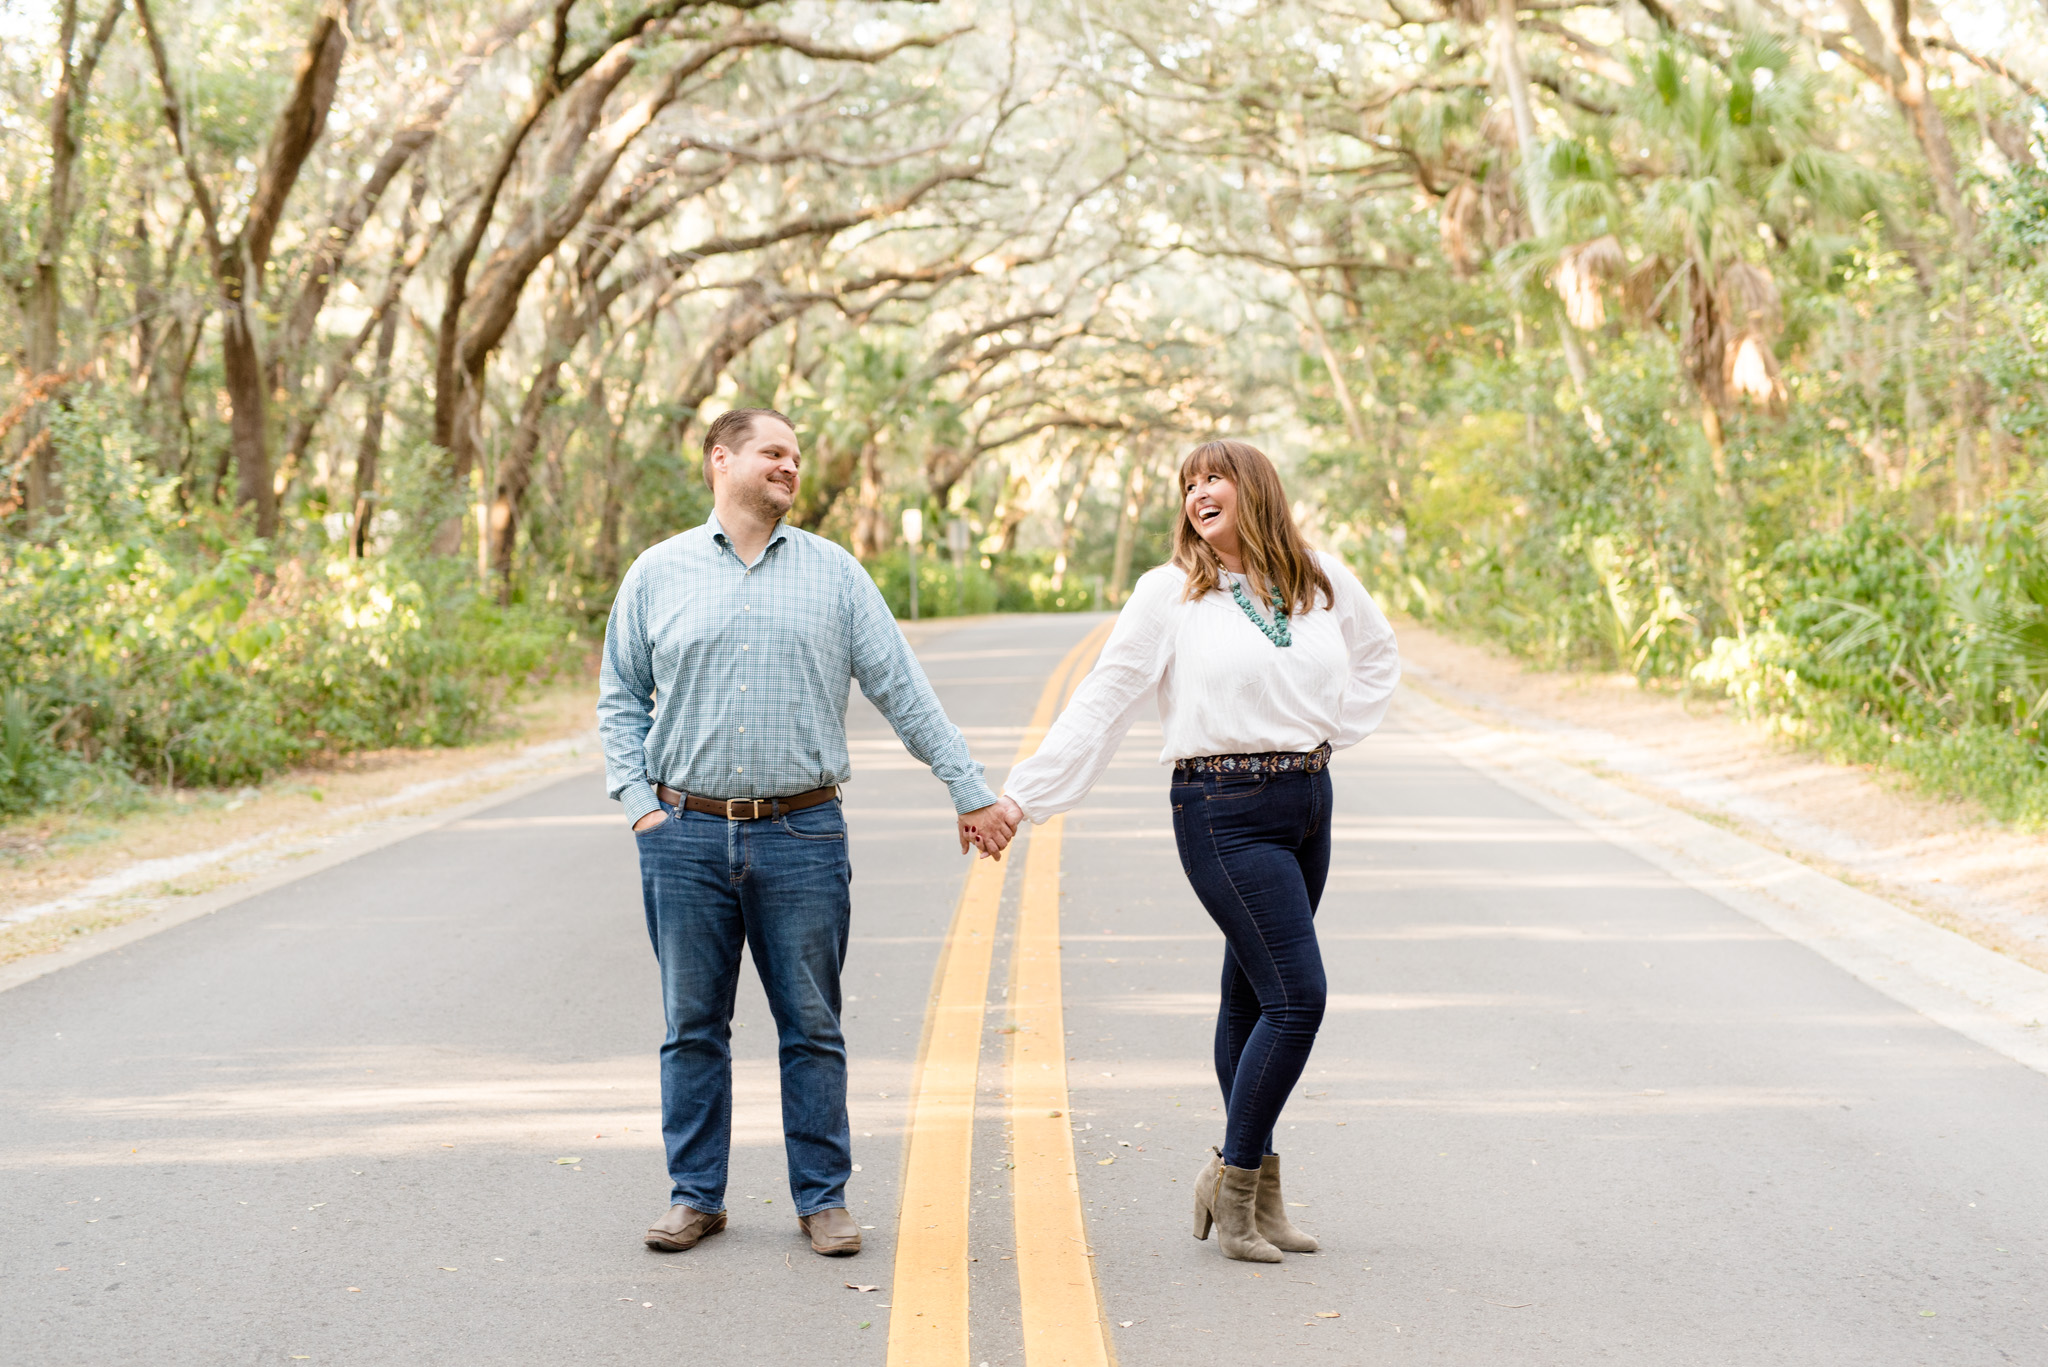 Engaged couple laughs while standing in road.